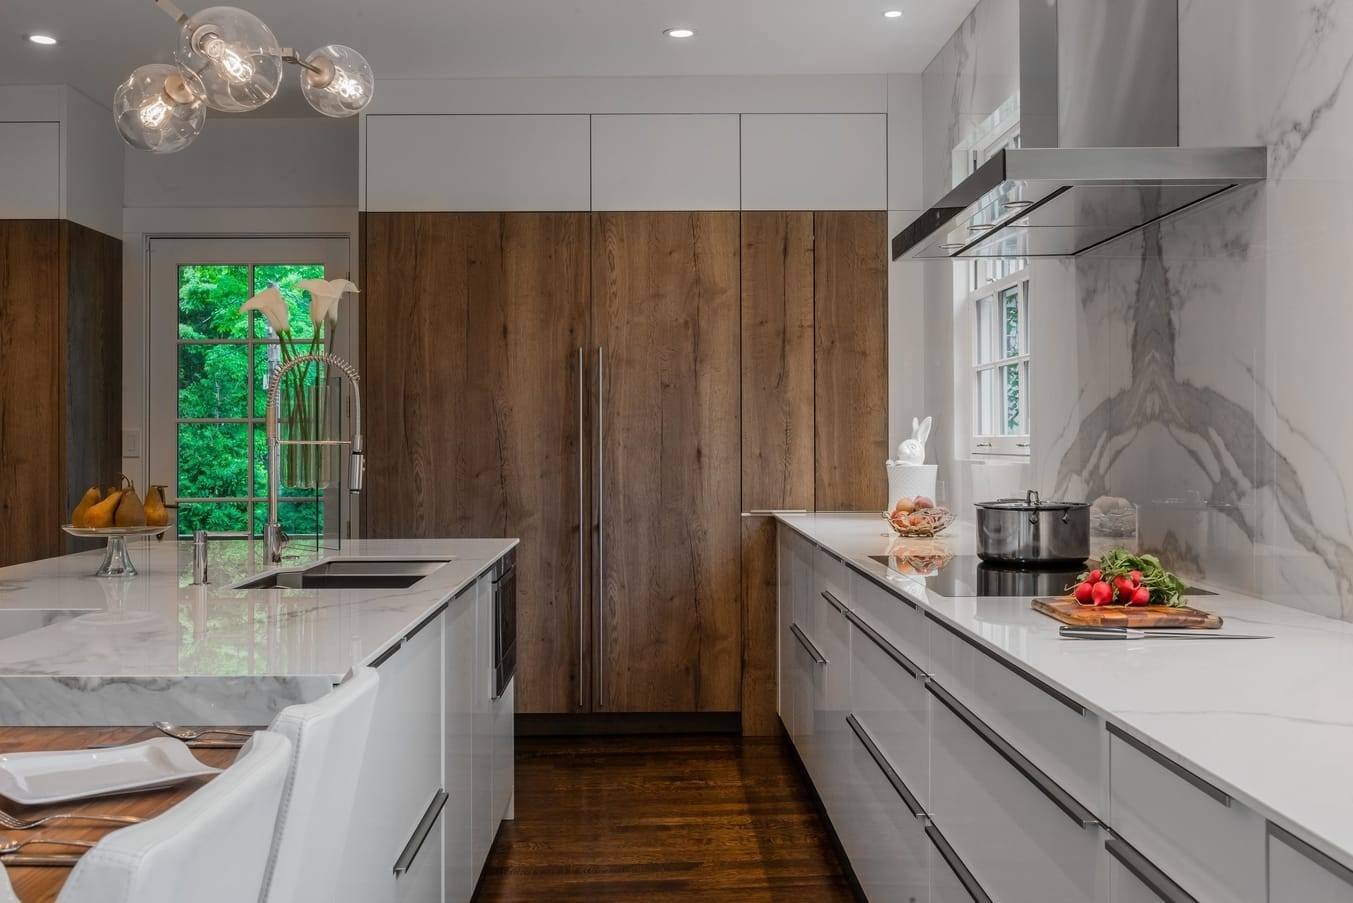 For sale: Homes with blue kitchen cabinets - The Boston Globe